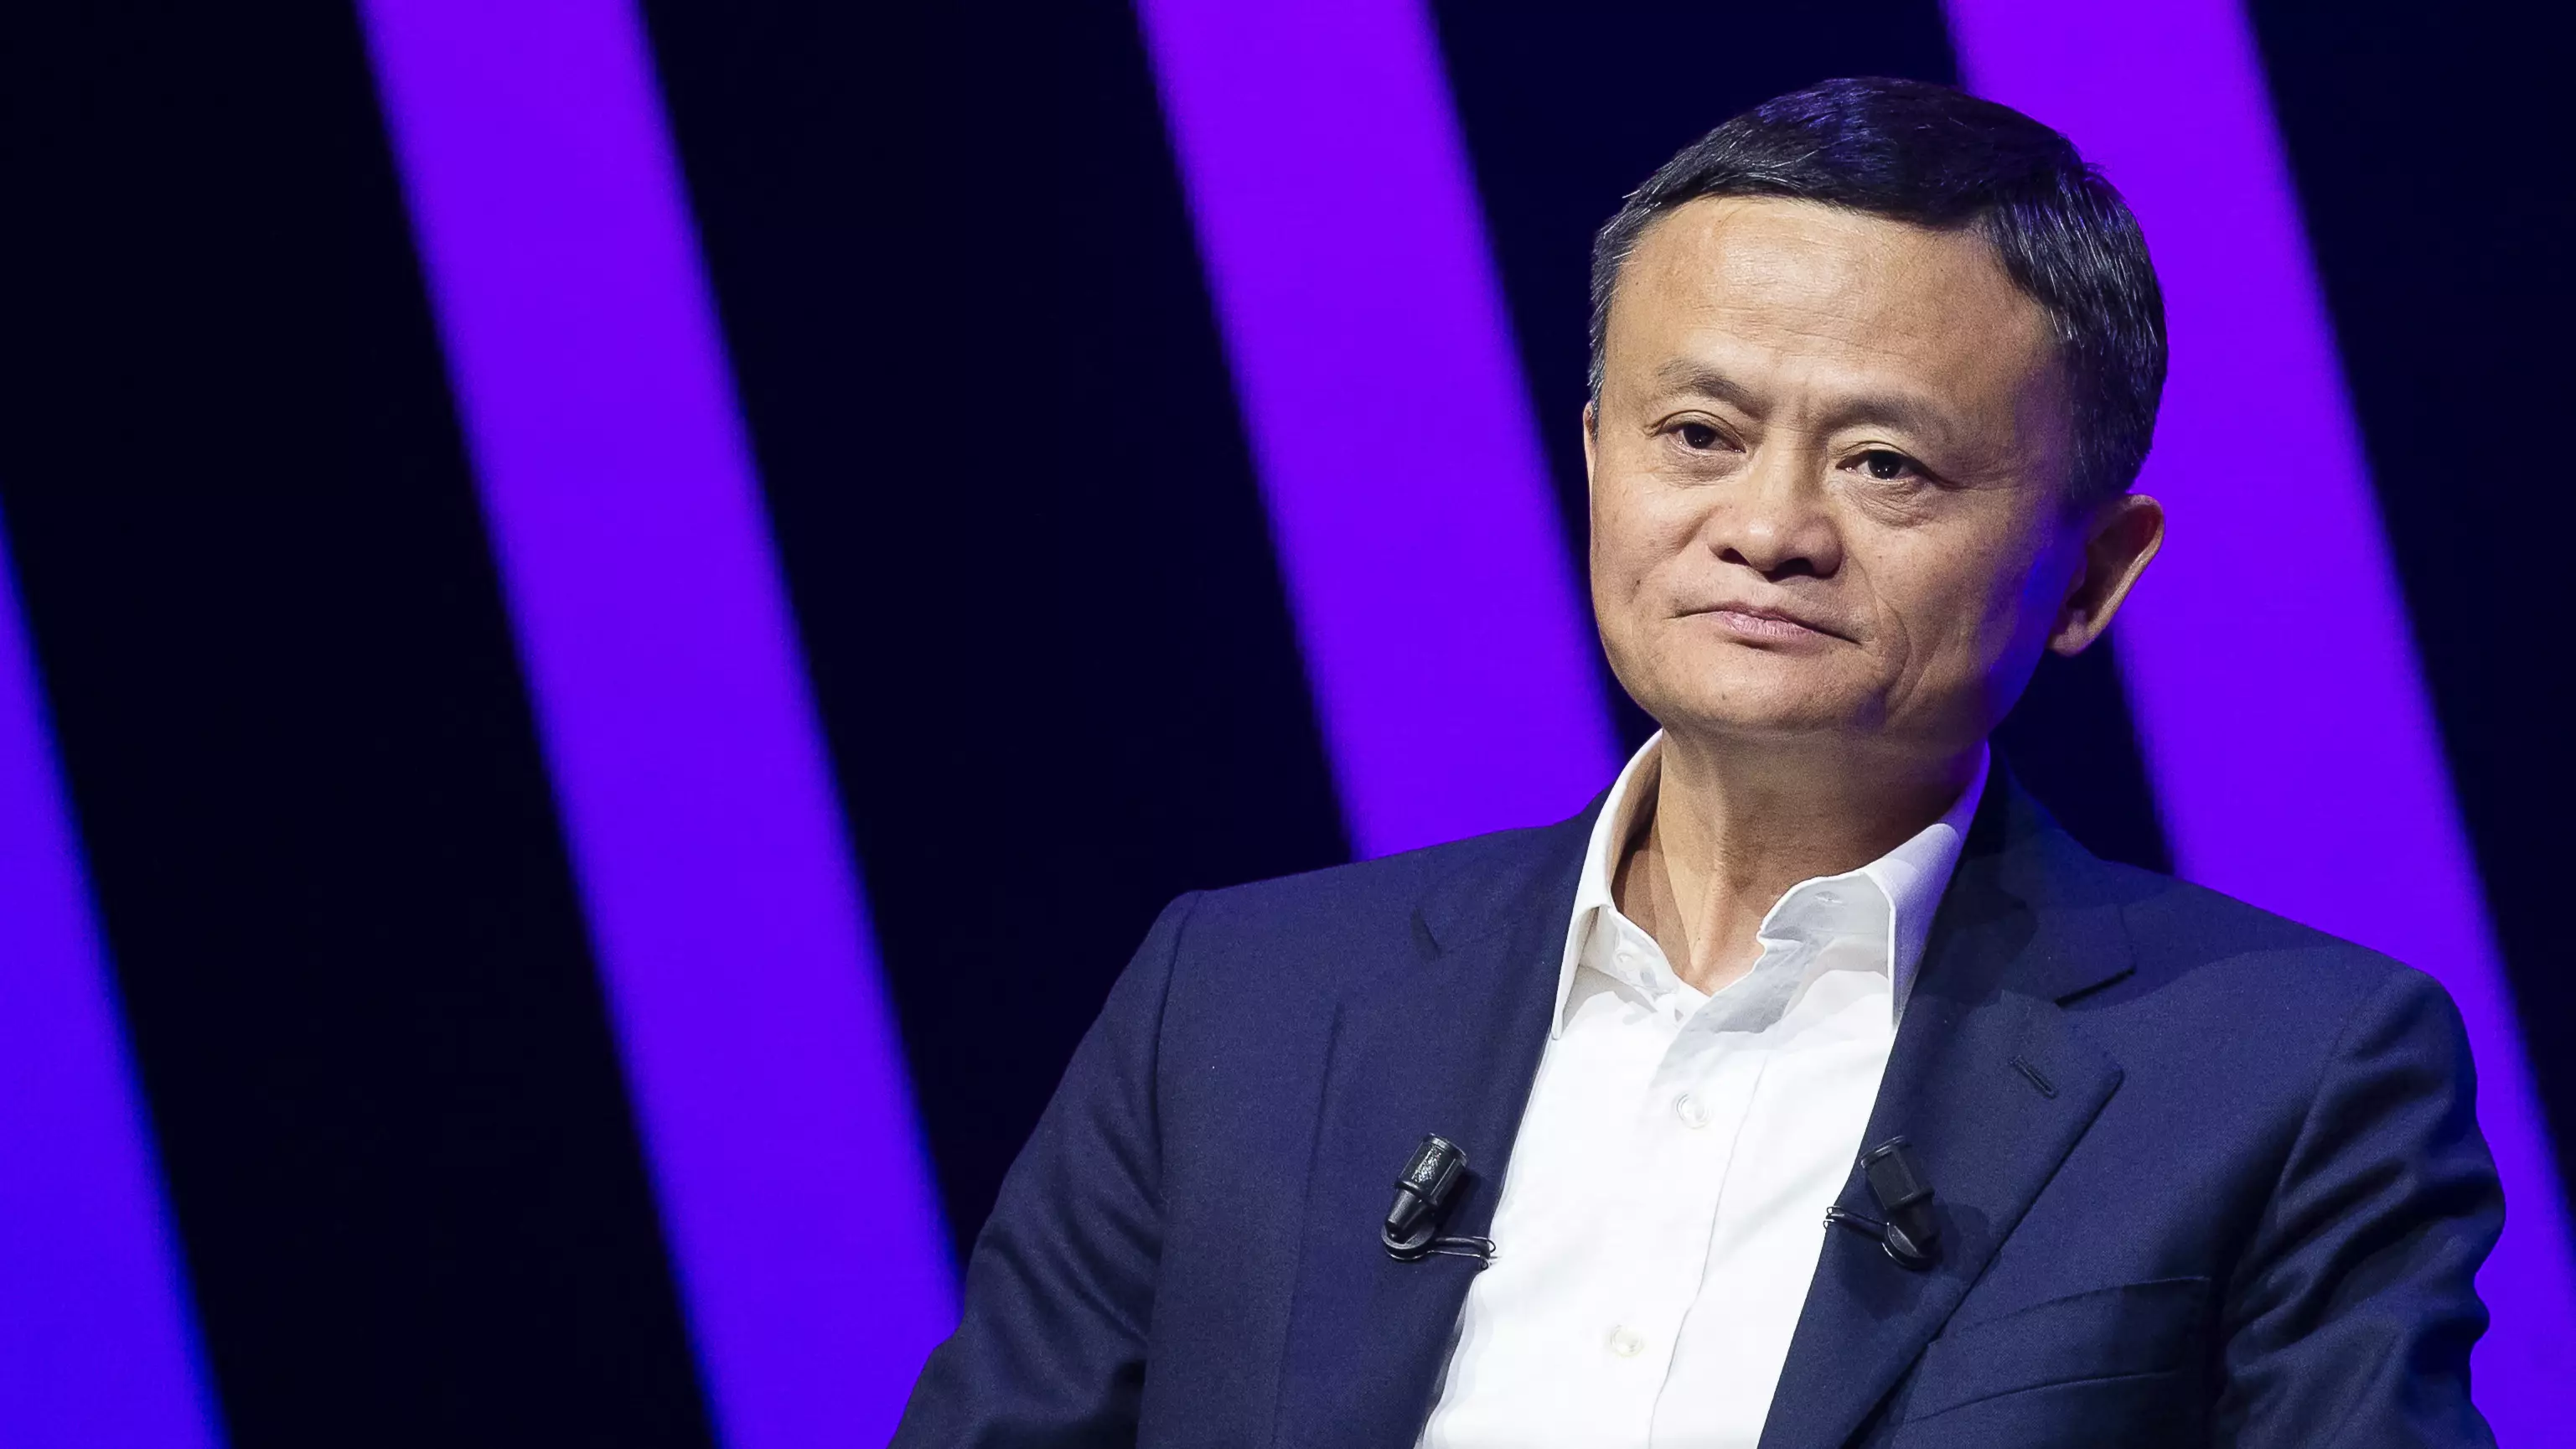 Alibaba Founder Jack Ma Is Not Missing, According To Report